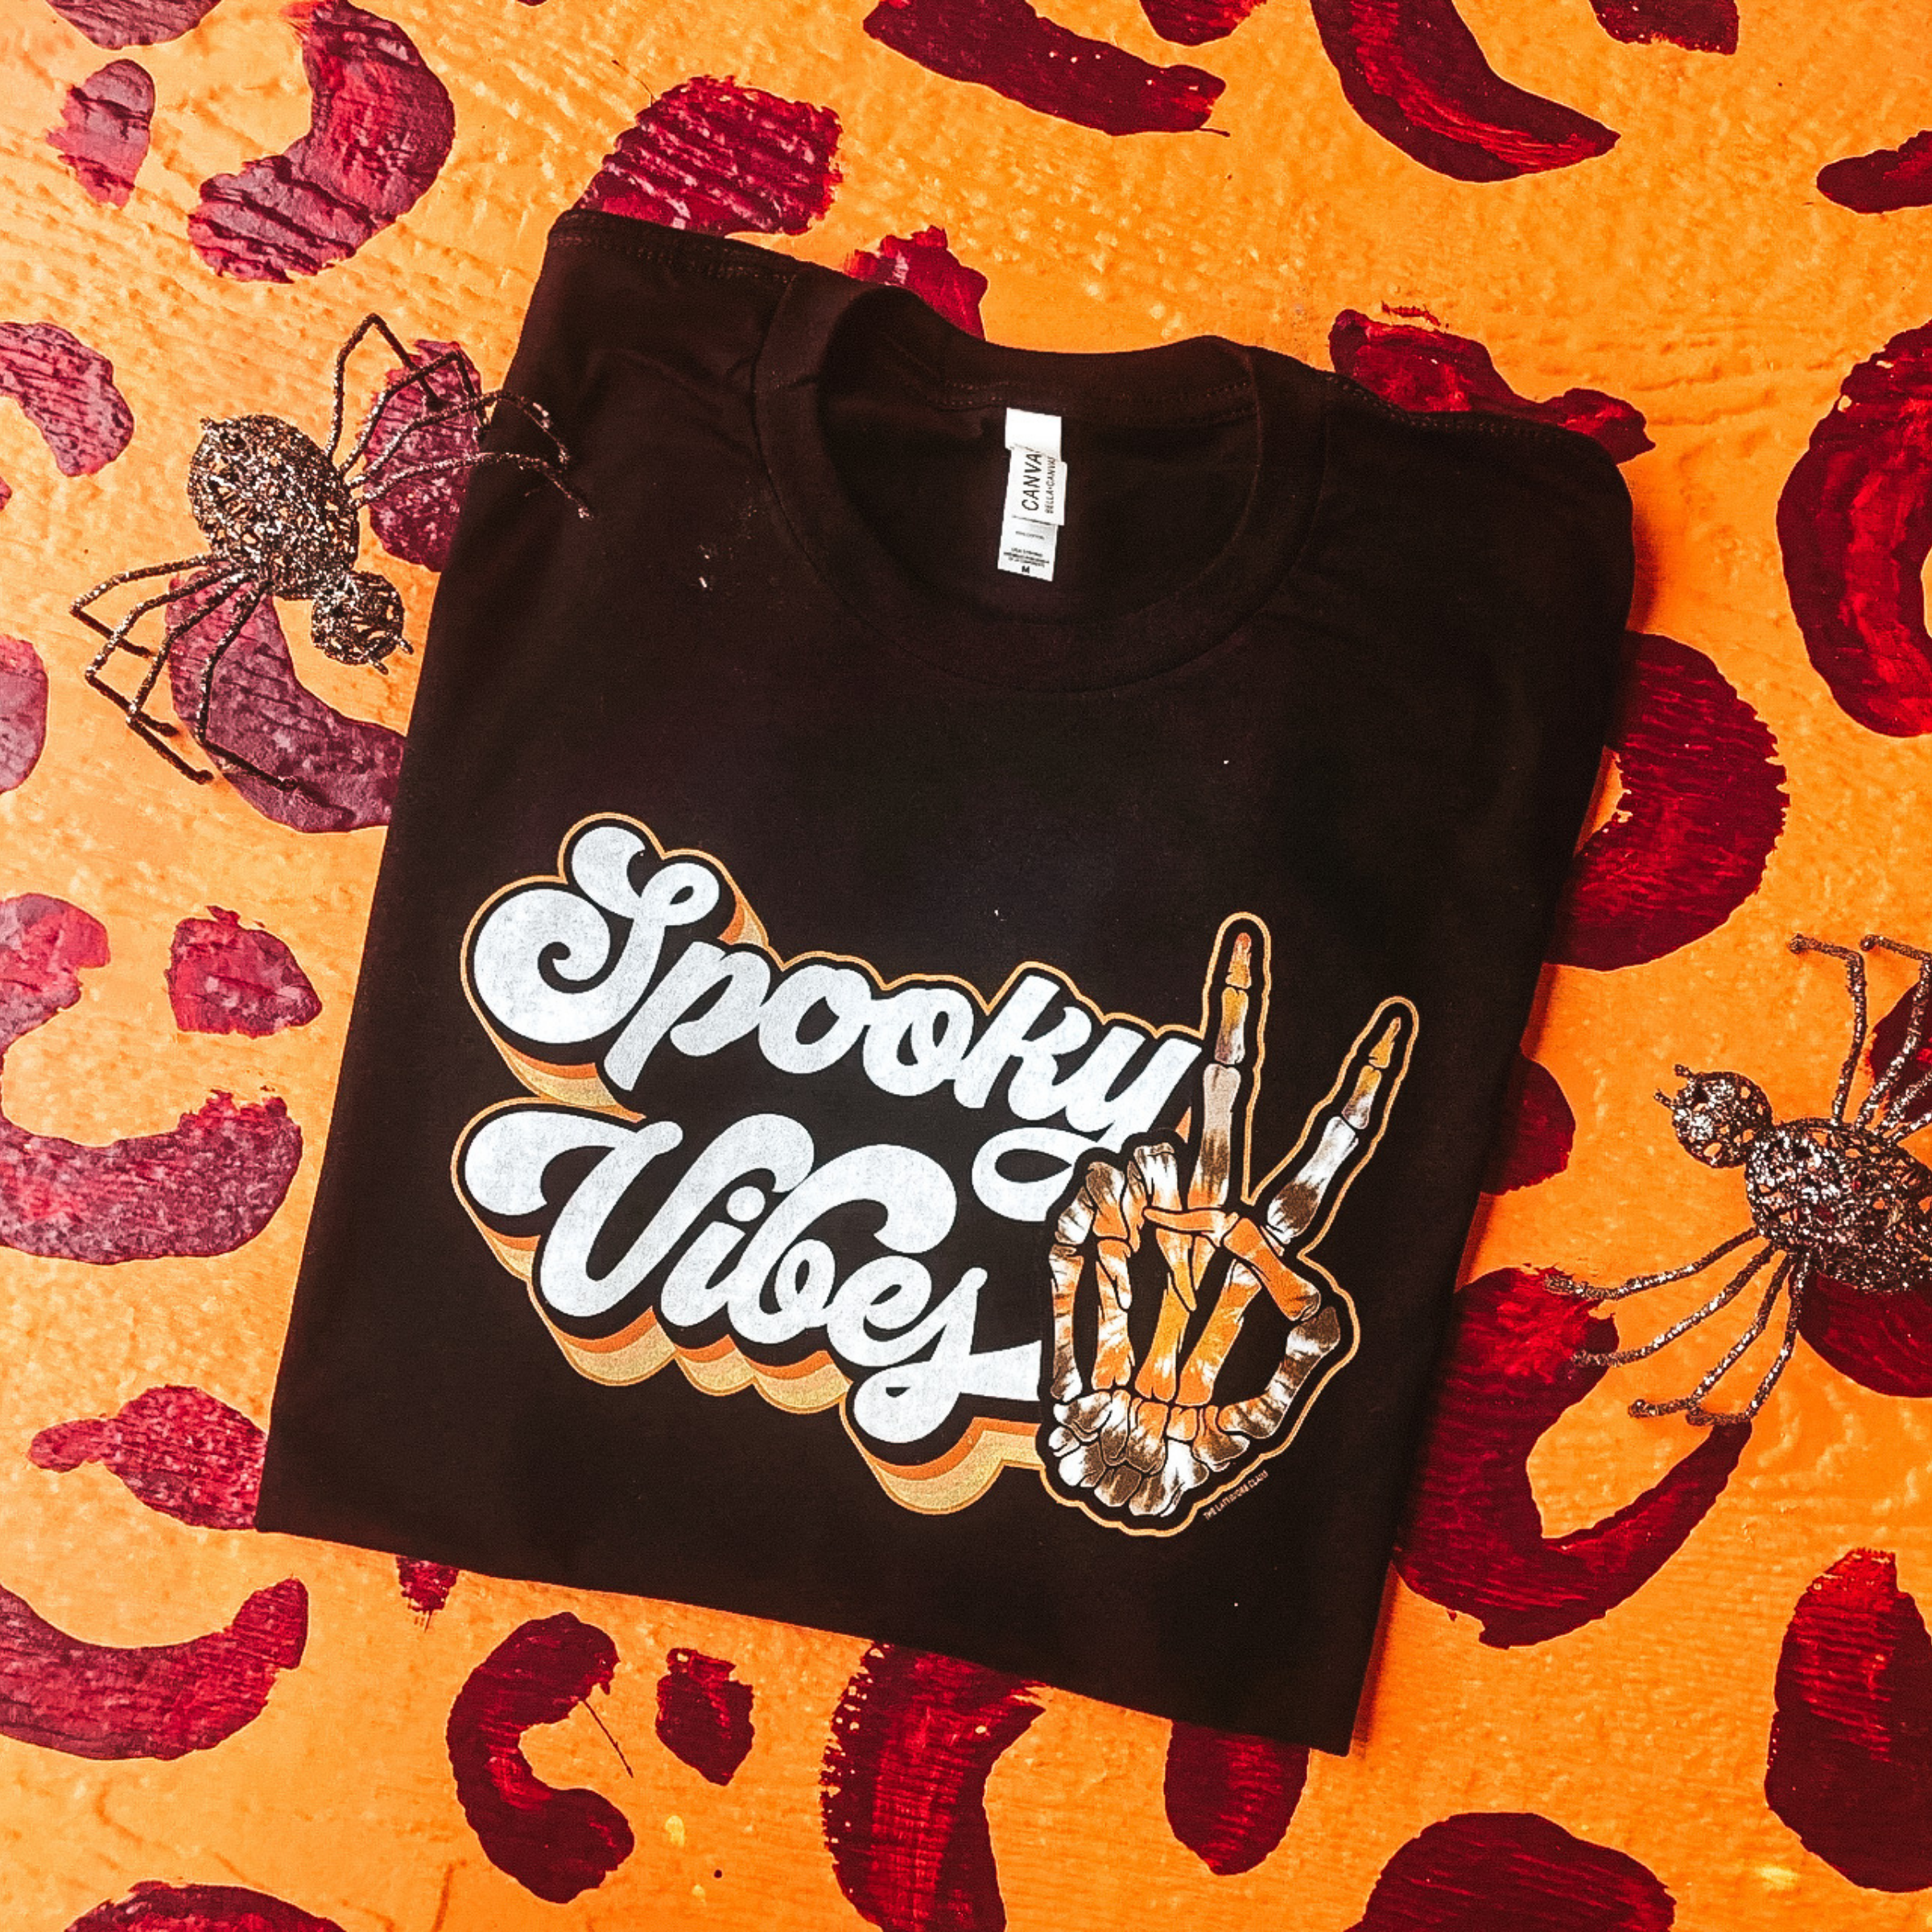 black graphic tee that reads "spooky vibes" in a groovy font with a skeleton hand doing a peace sign hand gesture. Tee is laying on a leopard print backdrop with fake spiders as props. 